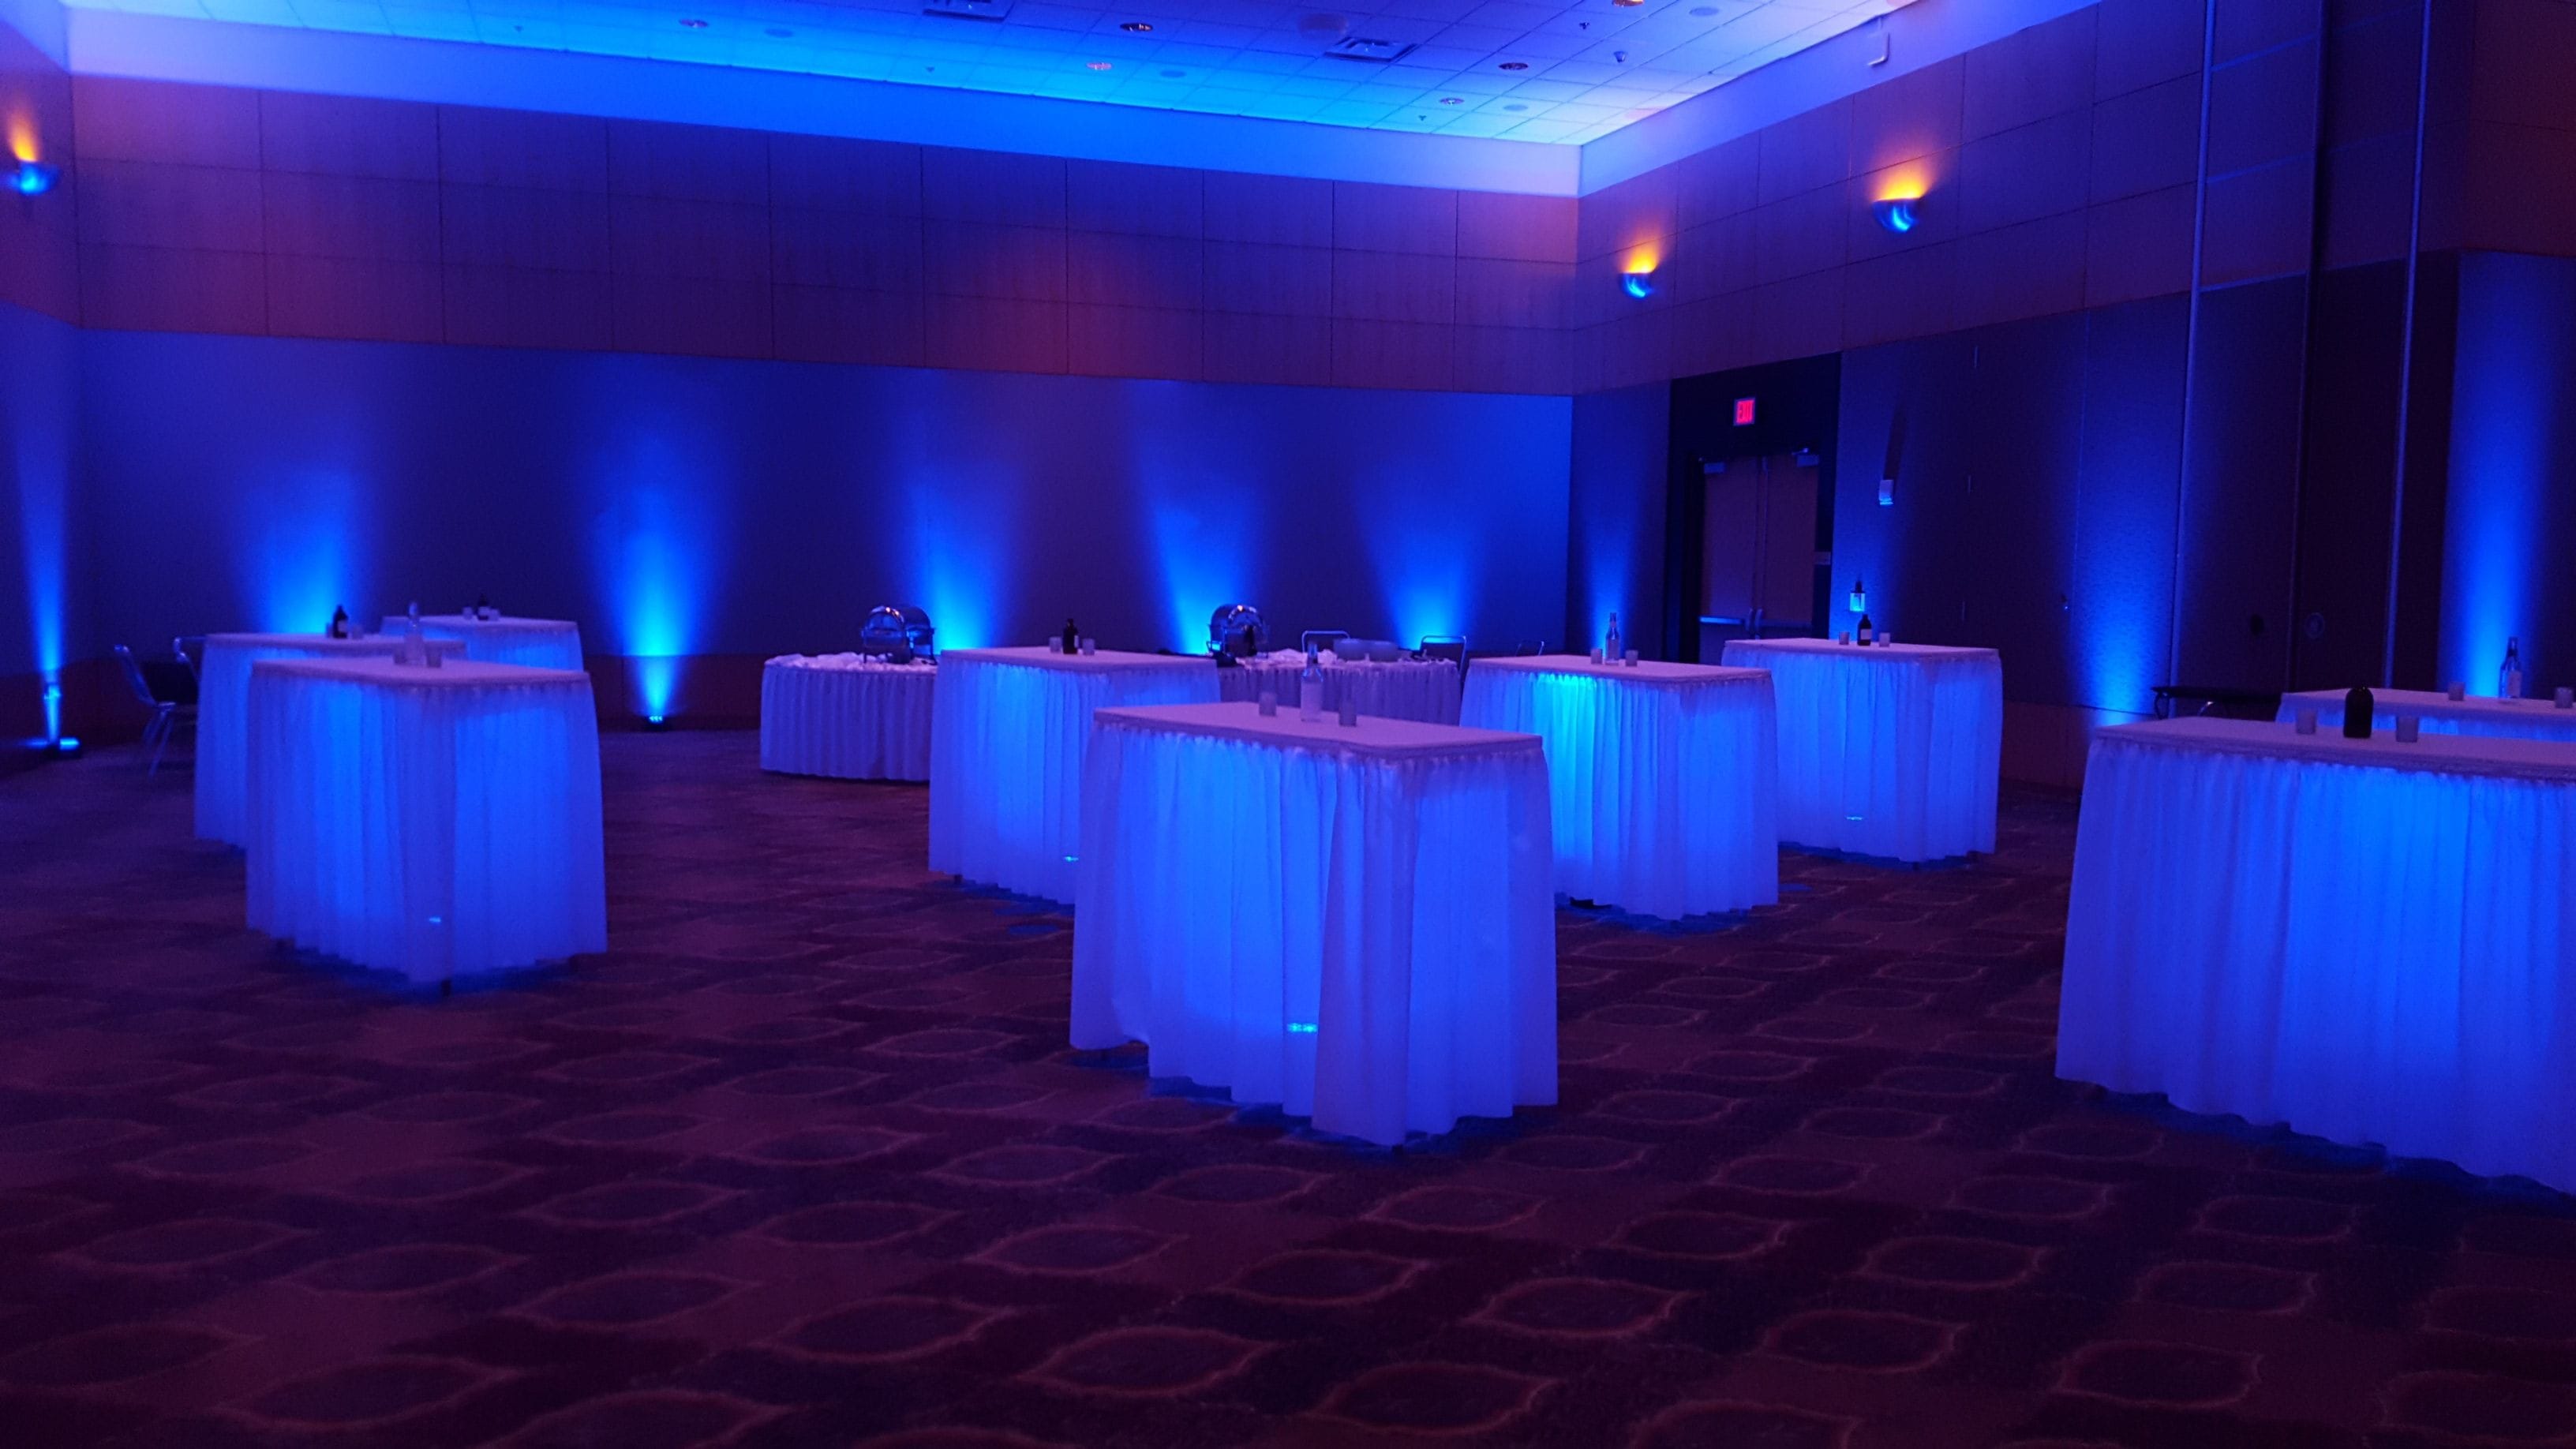 DECC Horizon Room,
Blue up lighting with glowing cocktail tables